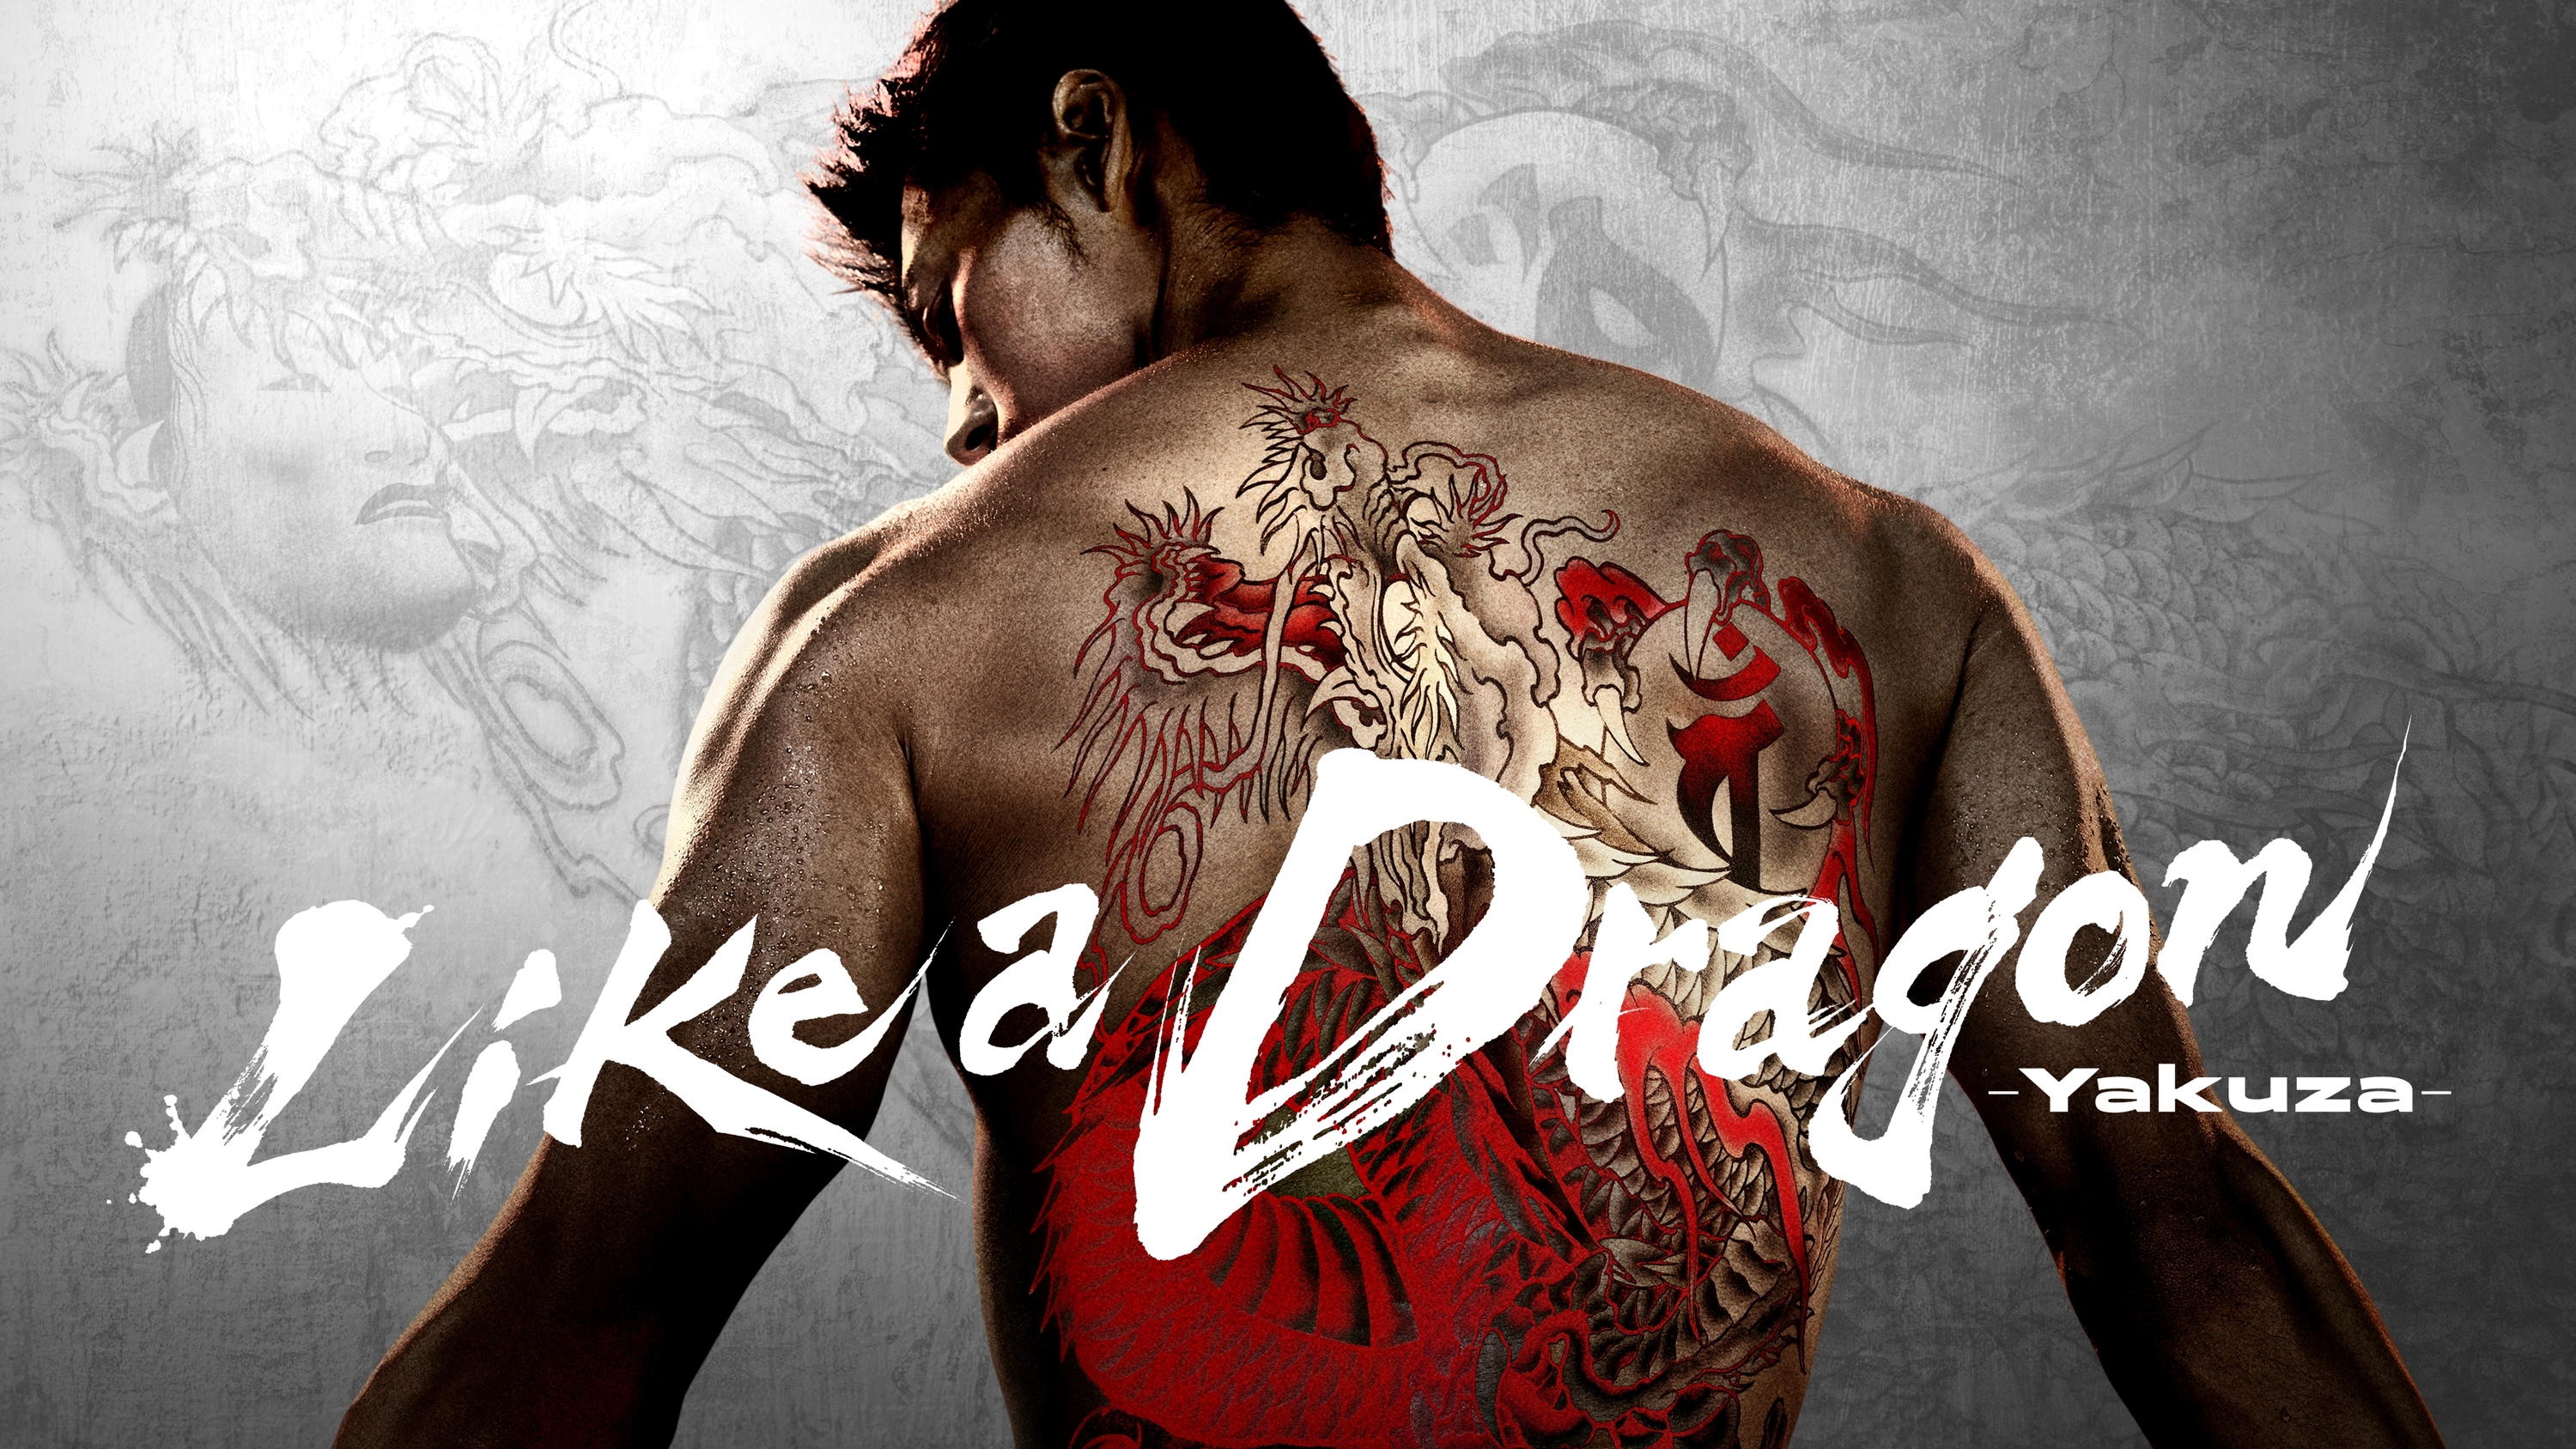 A man displays a tattooed back under the Like a Dragon: Yakuza logo in art for the Prime Video series